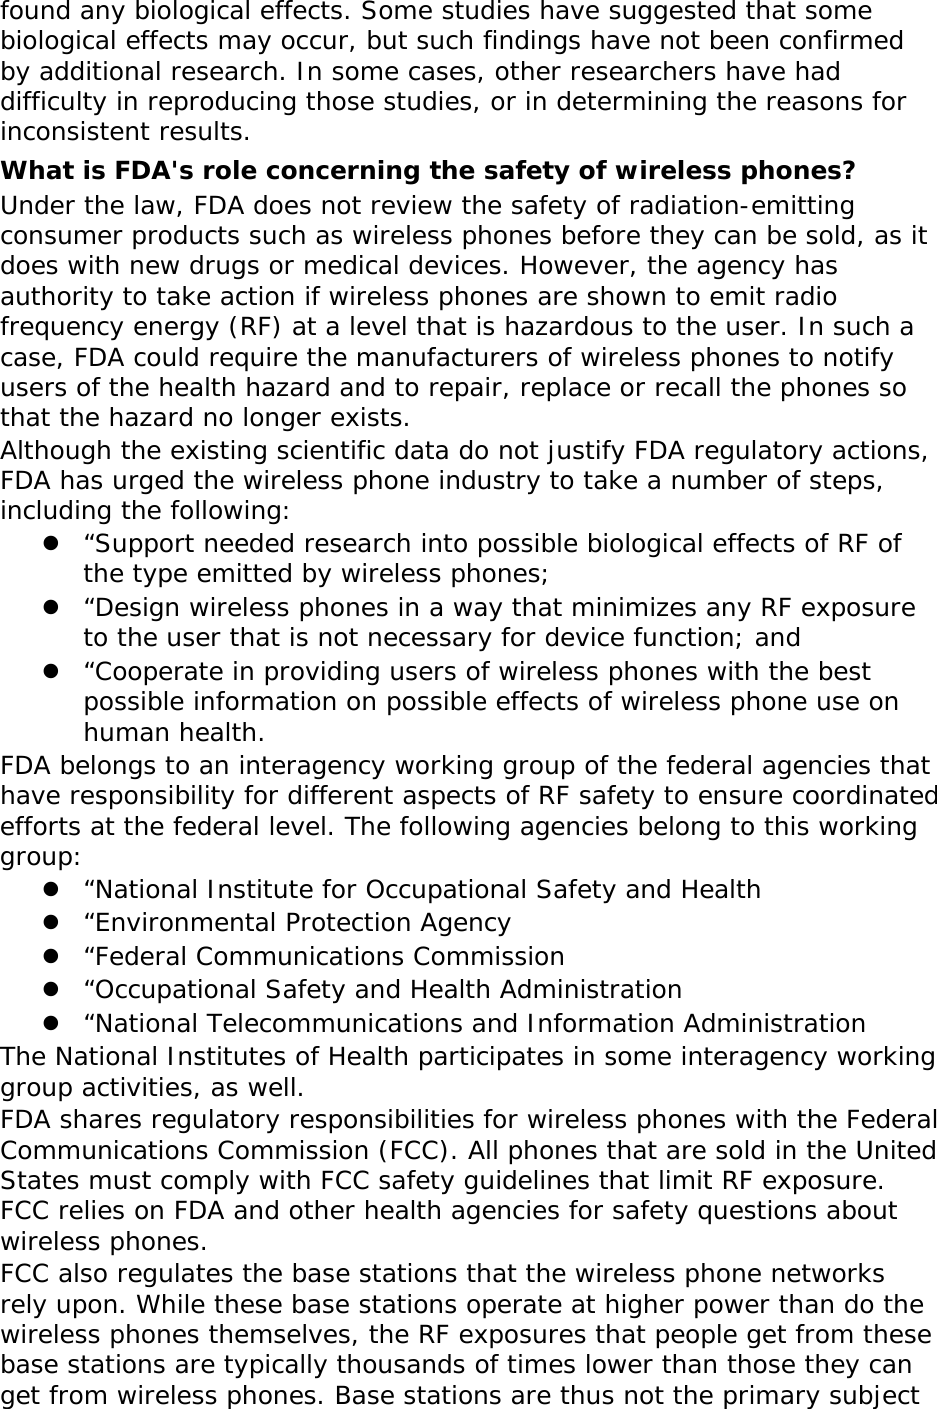 found any biological effects. Some studies have suggested that some biological effects may occur, but such findings have not been confirmed by additional research. In some cases, other researchers have had difficulty in reproducing those studies, or in determining the reasons for inconsistent results. What is FDA&apos;s role concerning the safety of wireless phones? Under the law, FDA does not review the safety of radiation-emitting consumer products such as wireless phones before they can be sold, as it does with new drugs or medical devices. However, the agency has authority to take action if wireless phones are shown to emit radio frequency energy (RF) at a level that is hazardous to the user. In such a case, FDA could require the manufacturers of wireless phones to notify users of the health hazard and to repair, replace or recall the phones so that the hazard no longer exists. Although the existing scientific data do not justify FDA regulatory actions, FDA has urged the wireless phone industry to take a number of steps, including the following:  “Support needed research into possible biological effects of RF of the type emitted by wireless phones;  “Design wireless phones in a way that minimizes any RF exposure to the user that is not necessary for device function; and  “Cooperate in providing users of wireless phones with the best possible information on possible effects of wireless phone use on human health. FDA belongs to an interagency working group of the federal agencies that have responsibility for different aspects of RF safety to ensure coordinated efforts at the federal level. The following agencies belong to this working group:  “National Institute for Occupational Safety and Health  “Environmental Protection Agency  “Federal Communications Commission  “Occupational Safety and Health Administration  “National Telecommunications and Information Administration The National Institutes of Health participates in some interagency working group activities, as well. FDA shares regulatory responsibilities for wireless phones with the Federal Communications Commission (FCC). All phones that are sold in the United States must comply with FCC safety guidelines that limit RF exposure. FCC relies on FDA and other health agencies for safety questions about wireless phones. FCC also regulates the base stations that the wireless phone networks rely upon. While these base stations operate at higher power than do the wireless phones themselves, the RF exposures that people get from these base stations are typically thousands of times lower than those they can get from wireless phones. Base stations are thus not the primary subject 